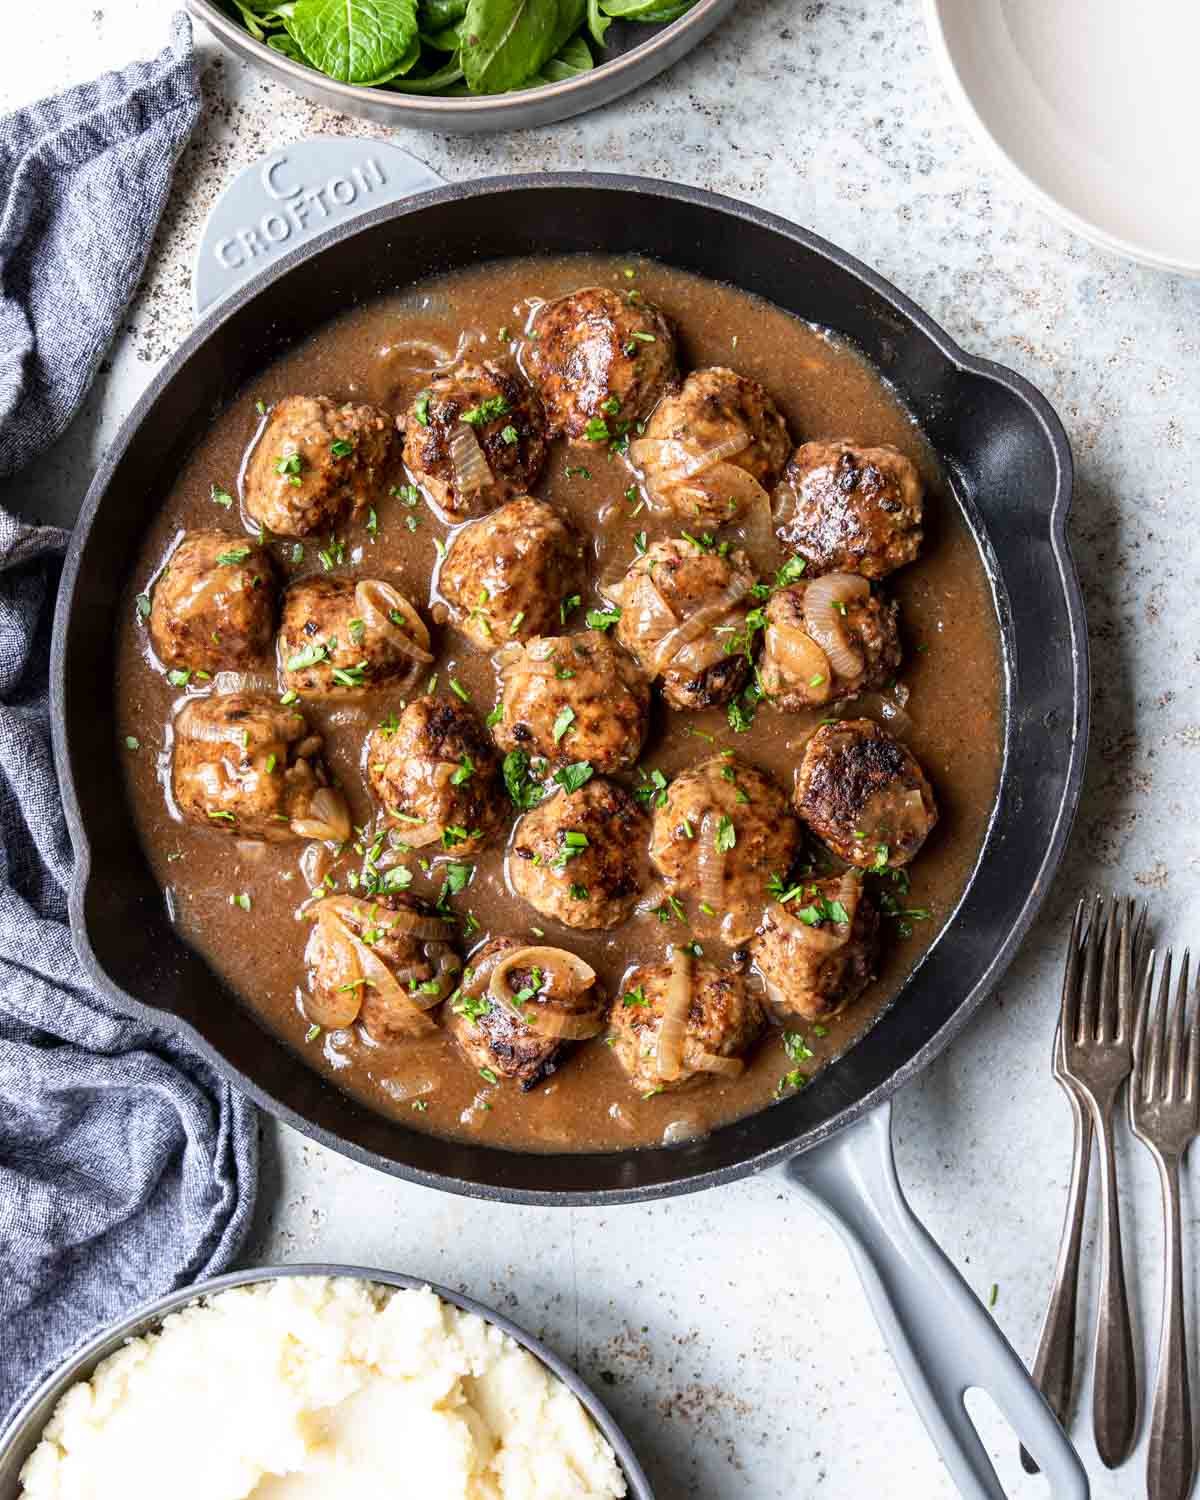 a skillet full of meatballs in a gravy with a salad and mashed potatoes to the side